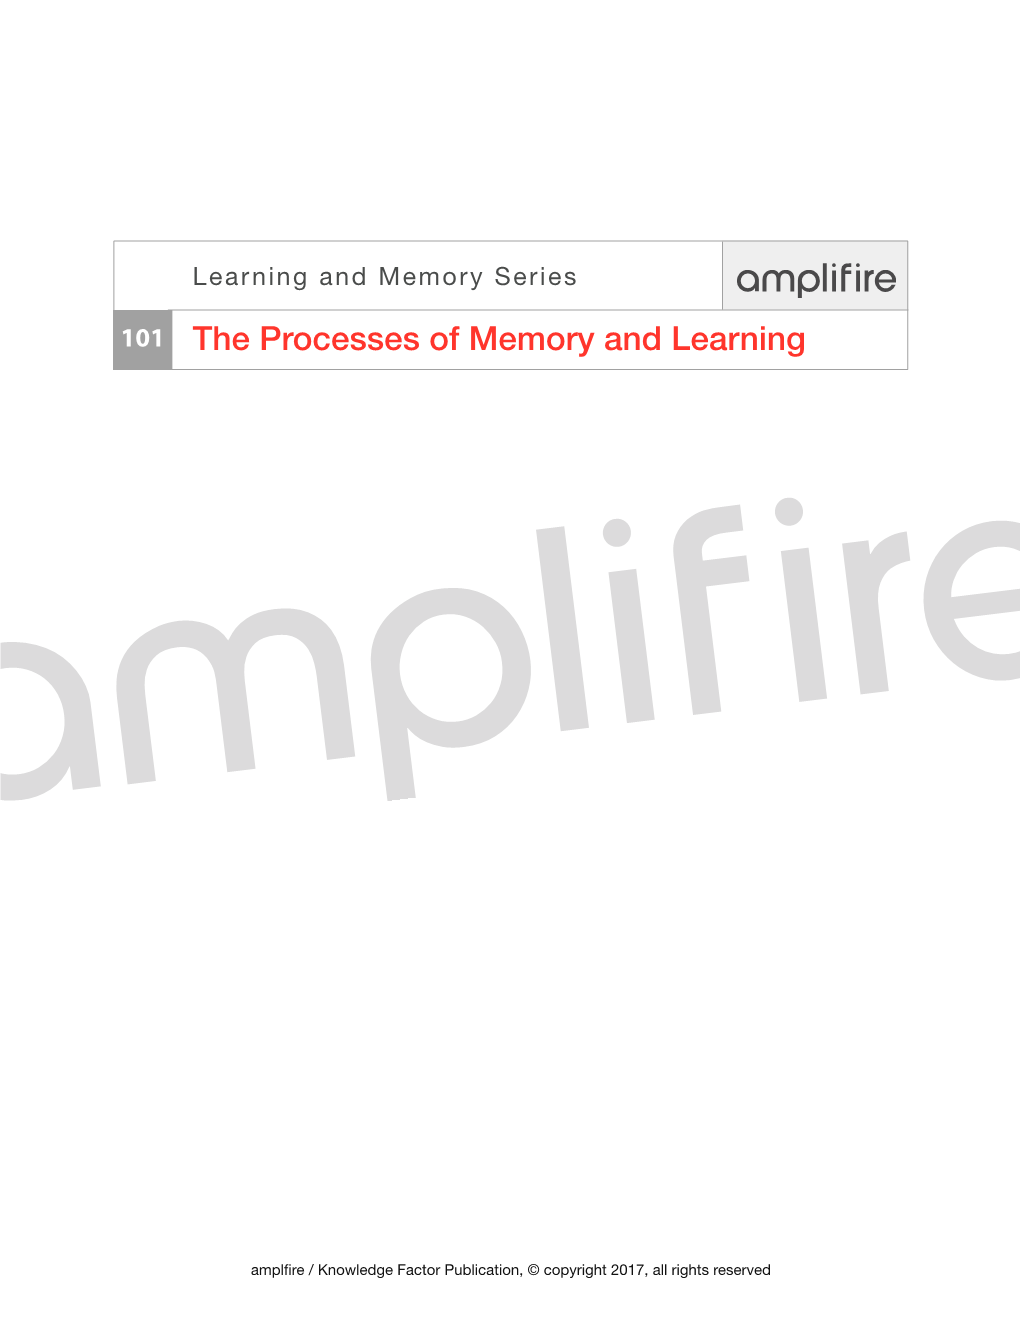 The Processes of Memory and Learning